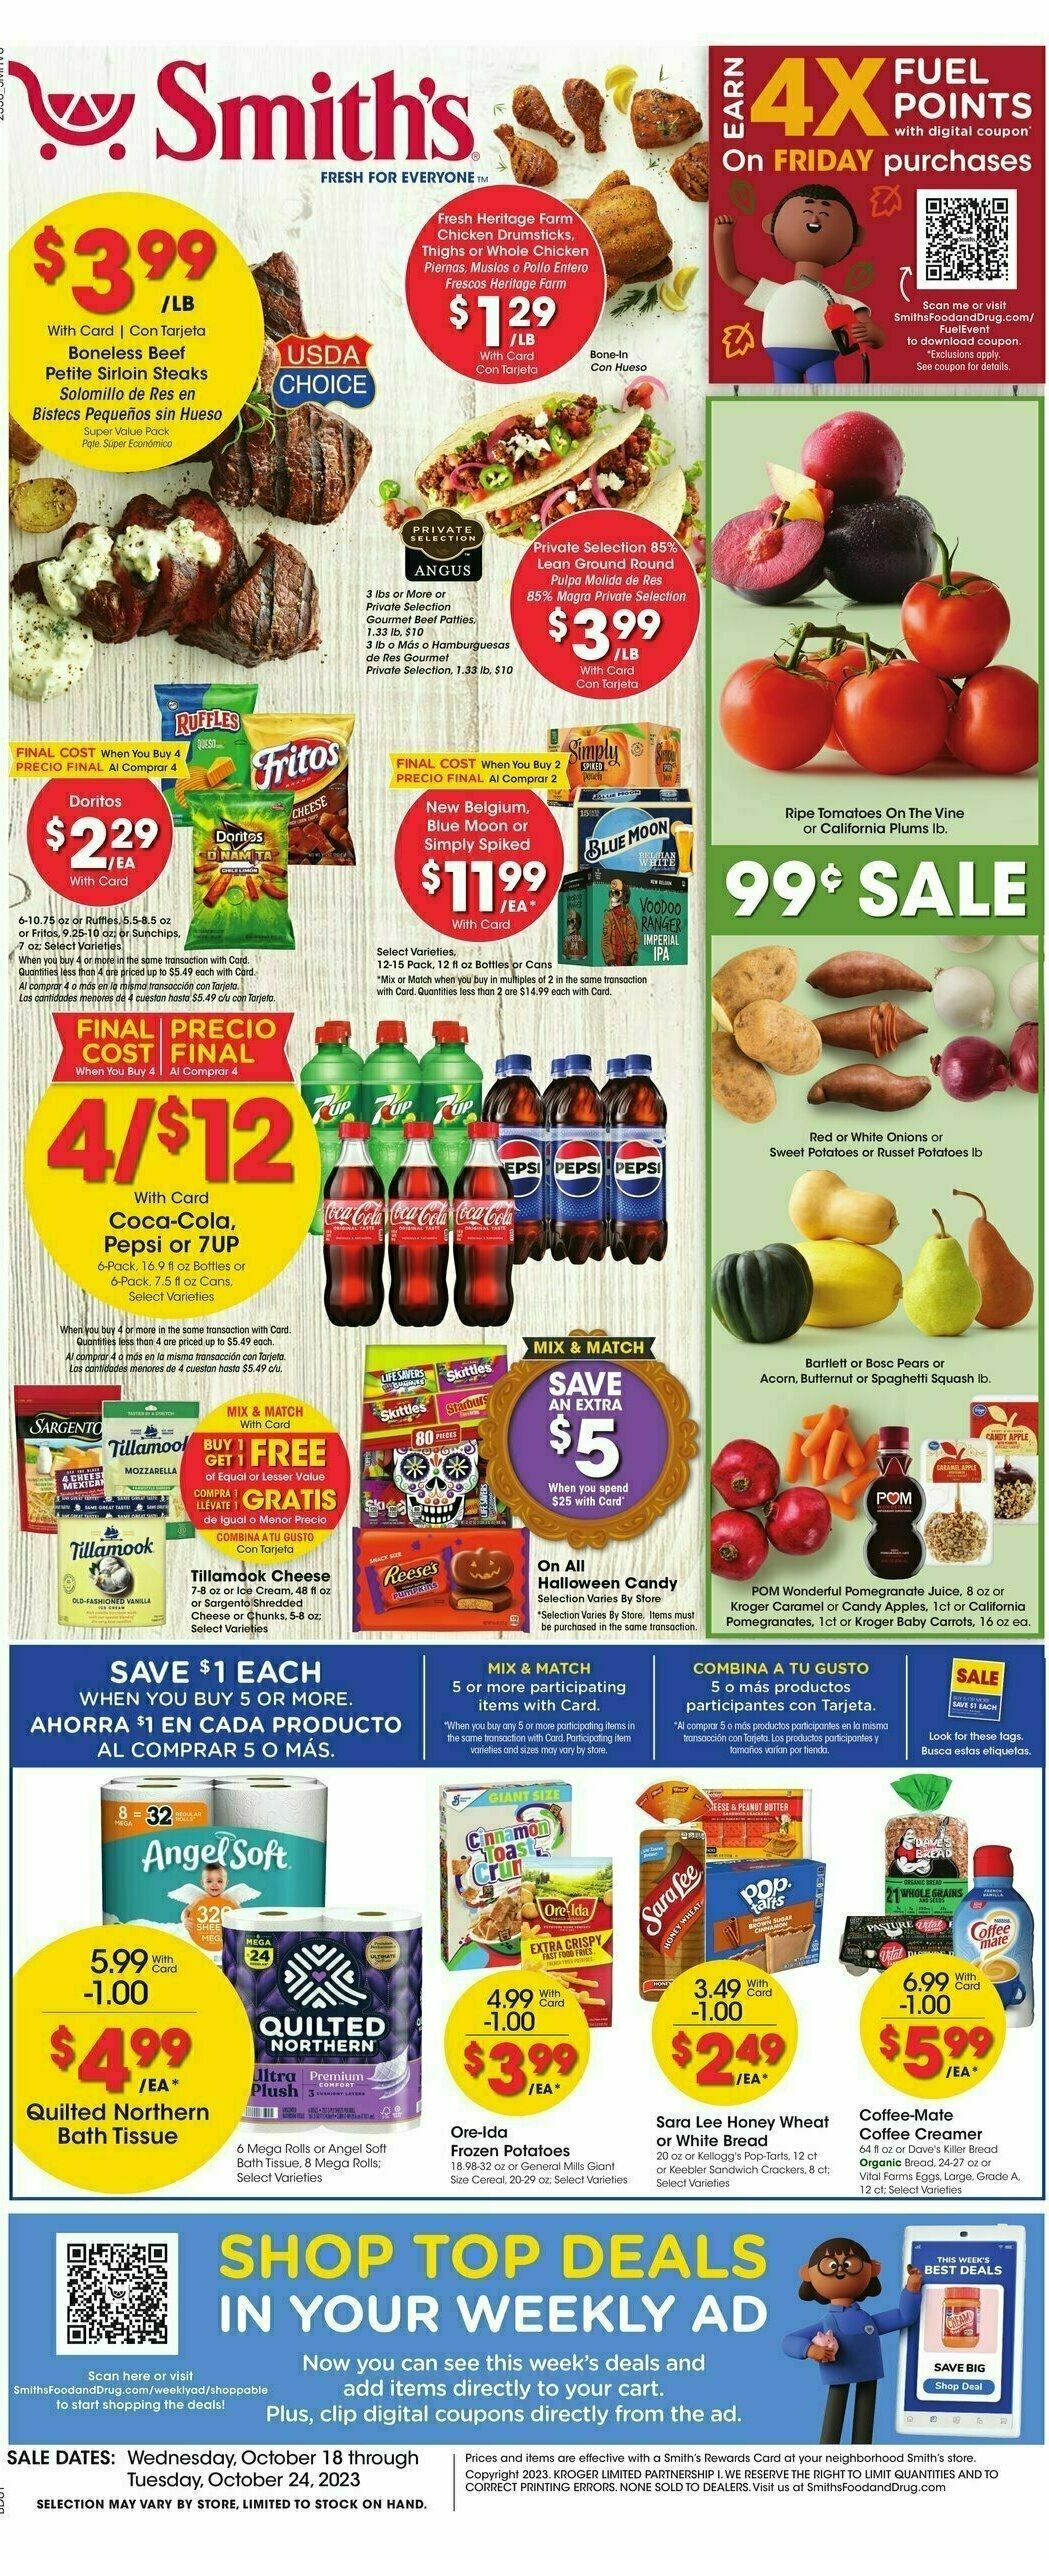 Smith's Weekly Ad from October 18